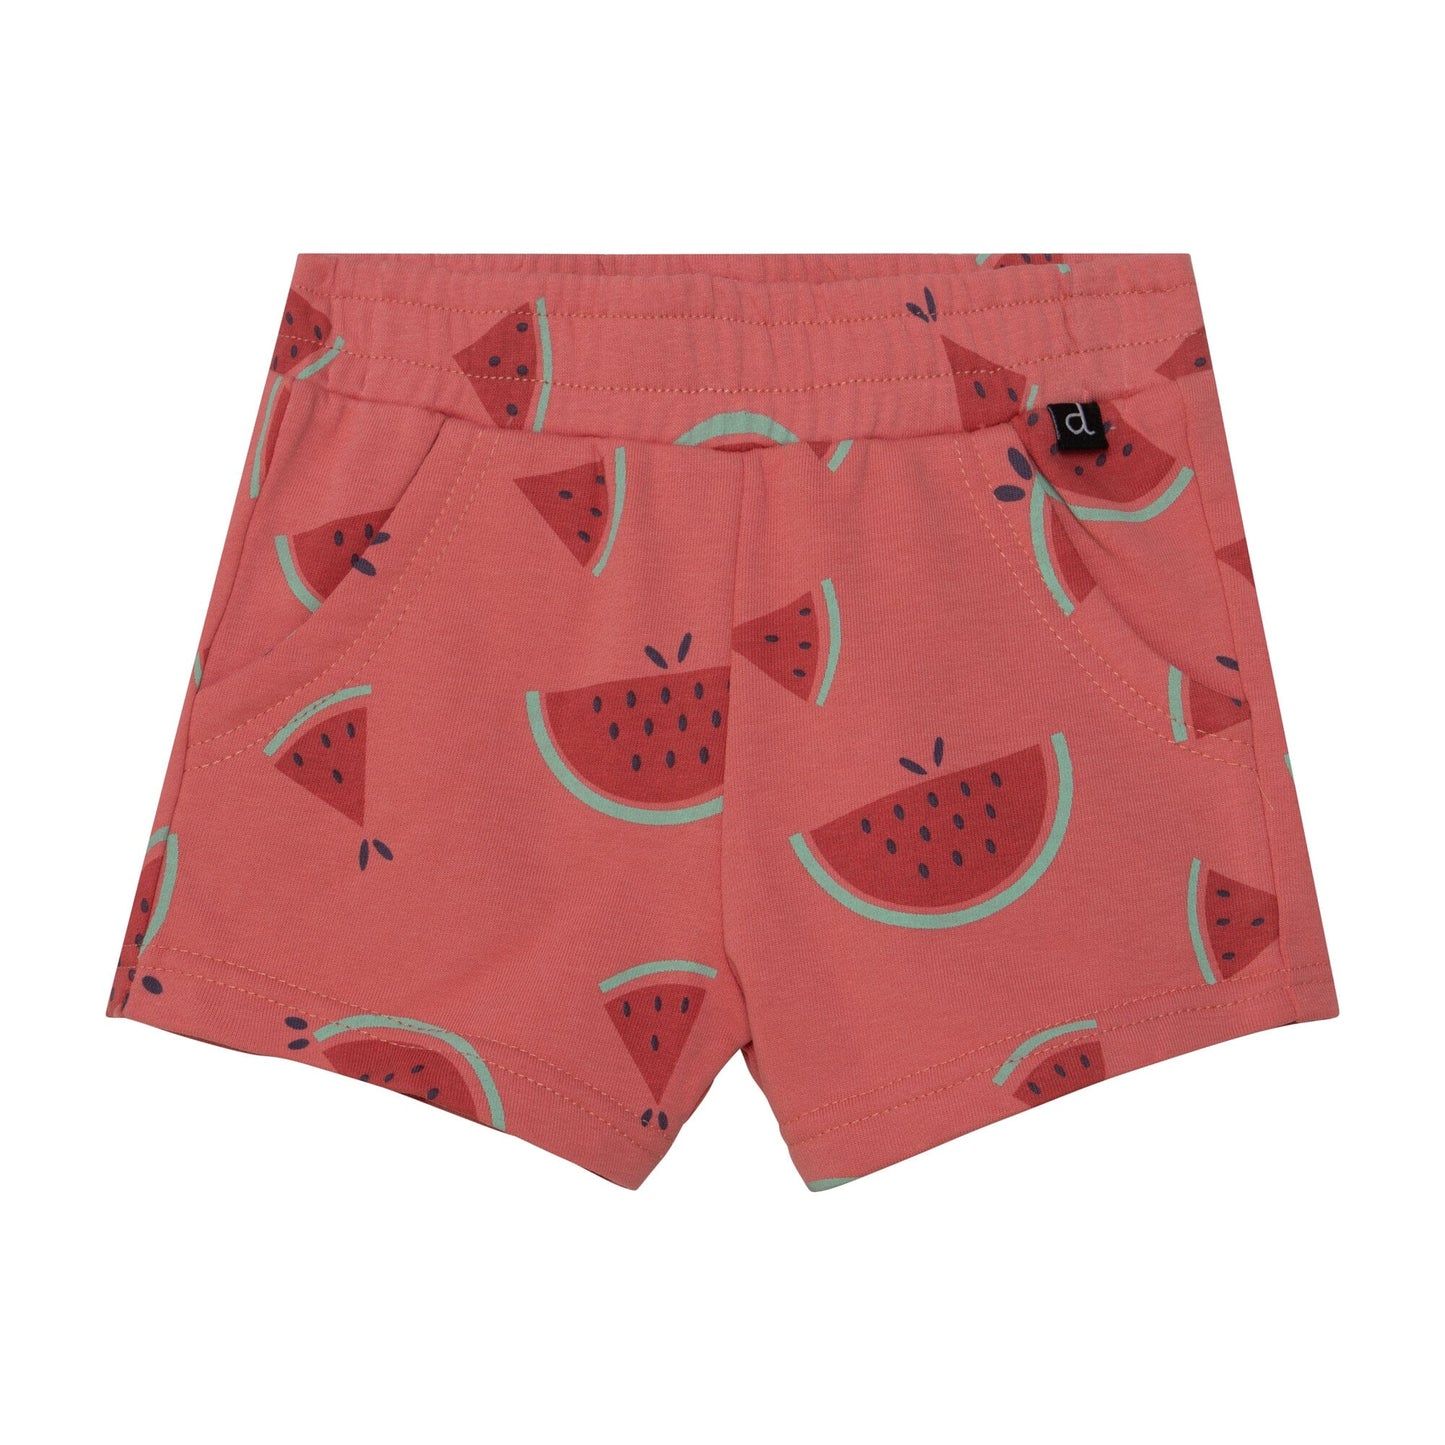 Printed French Terry Short Coral Watermelon - E30I25_078